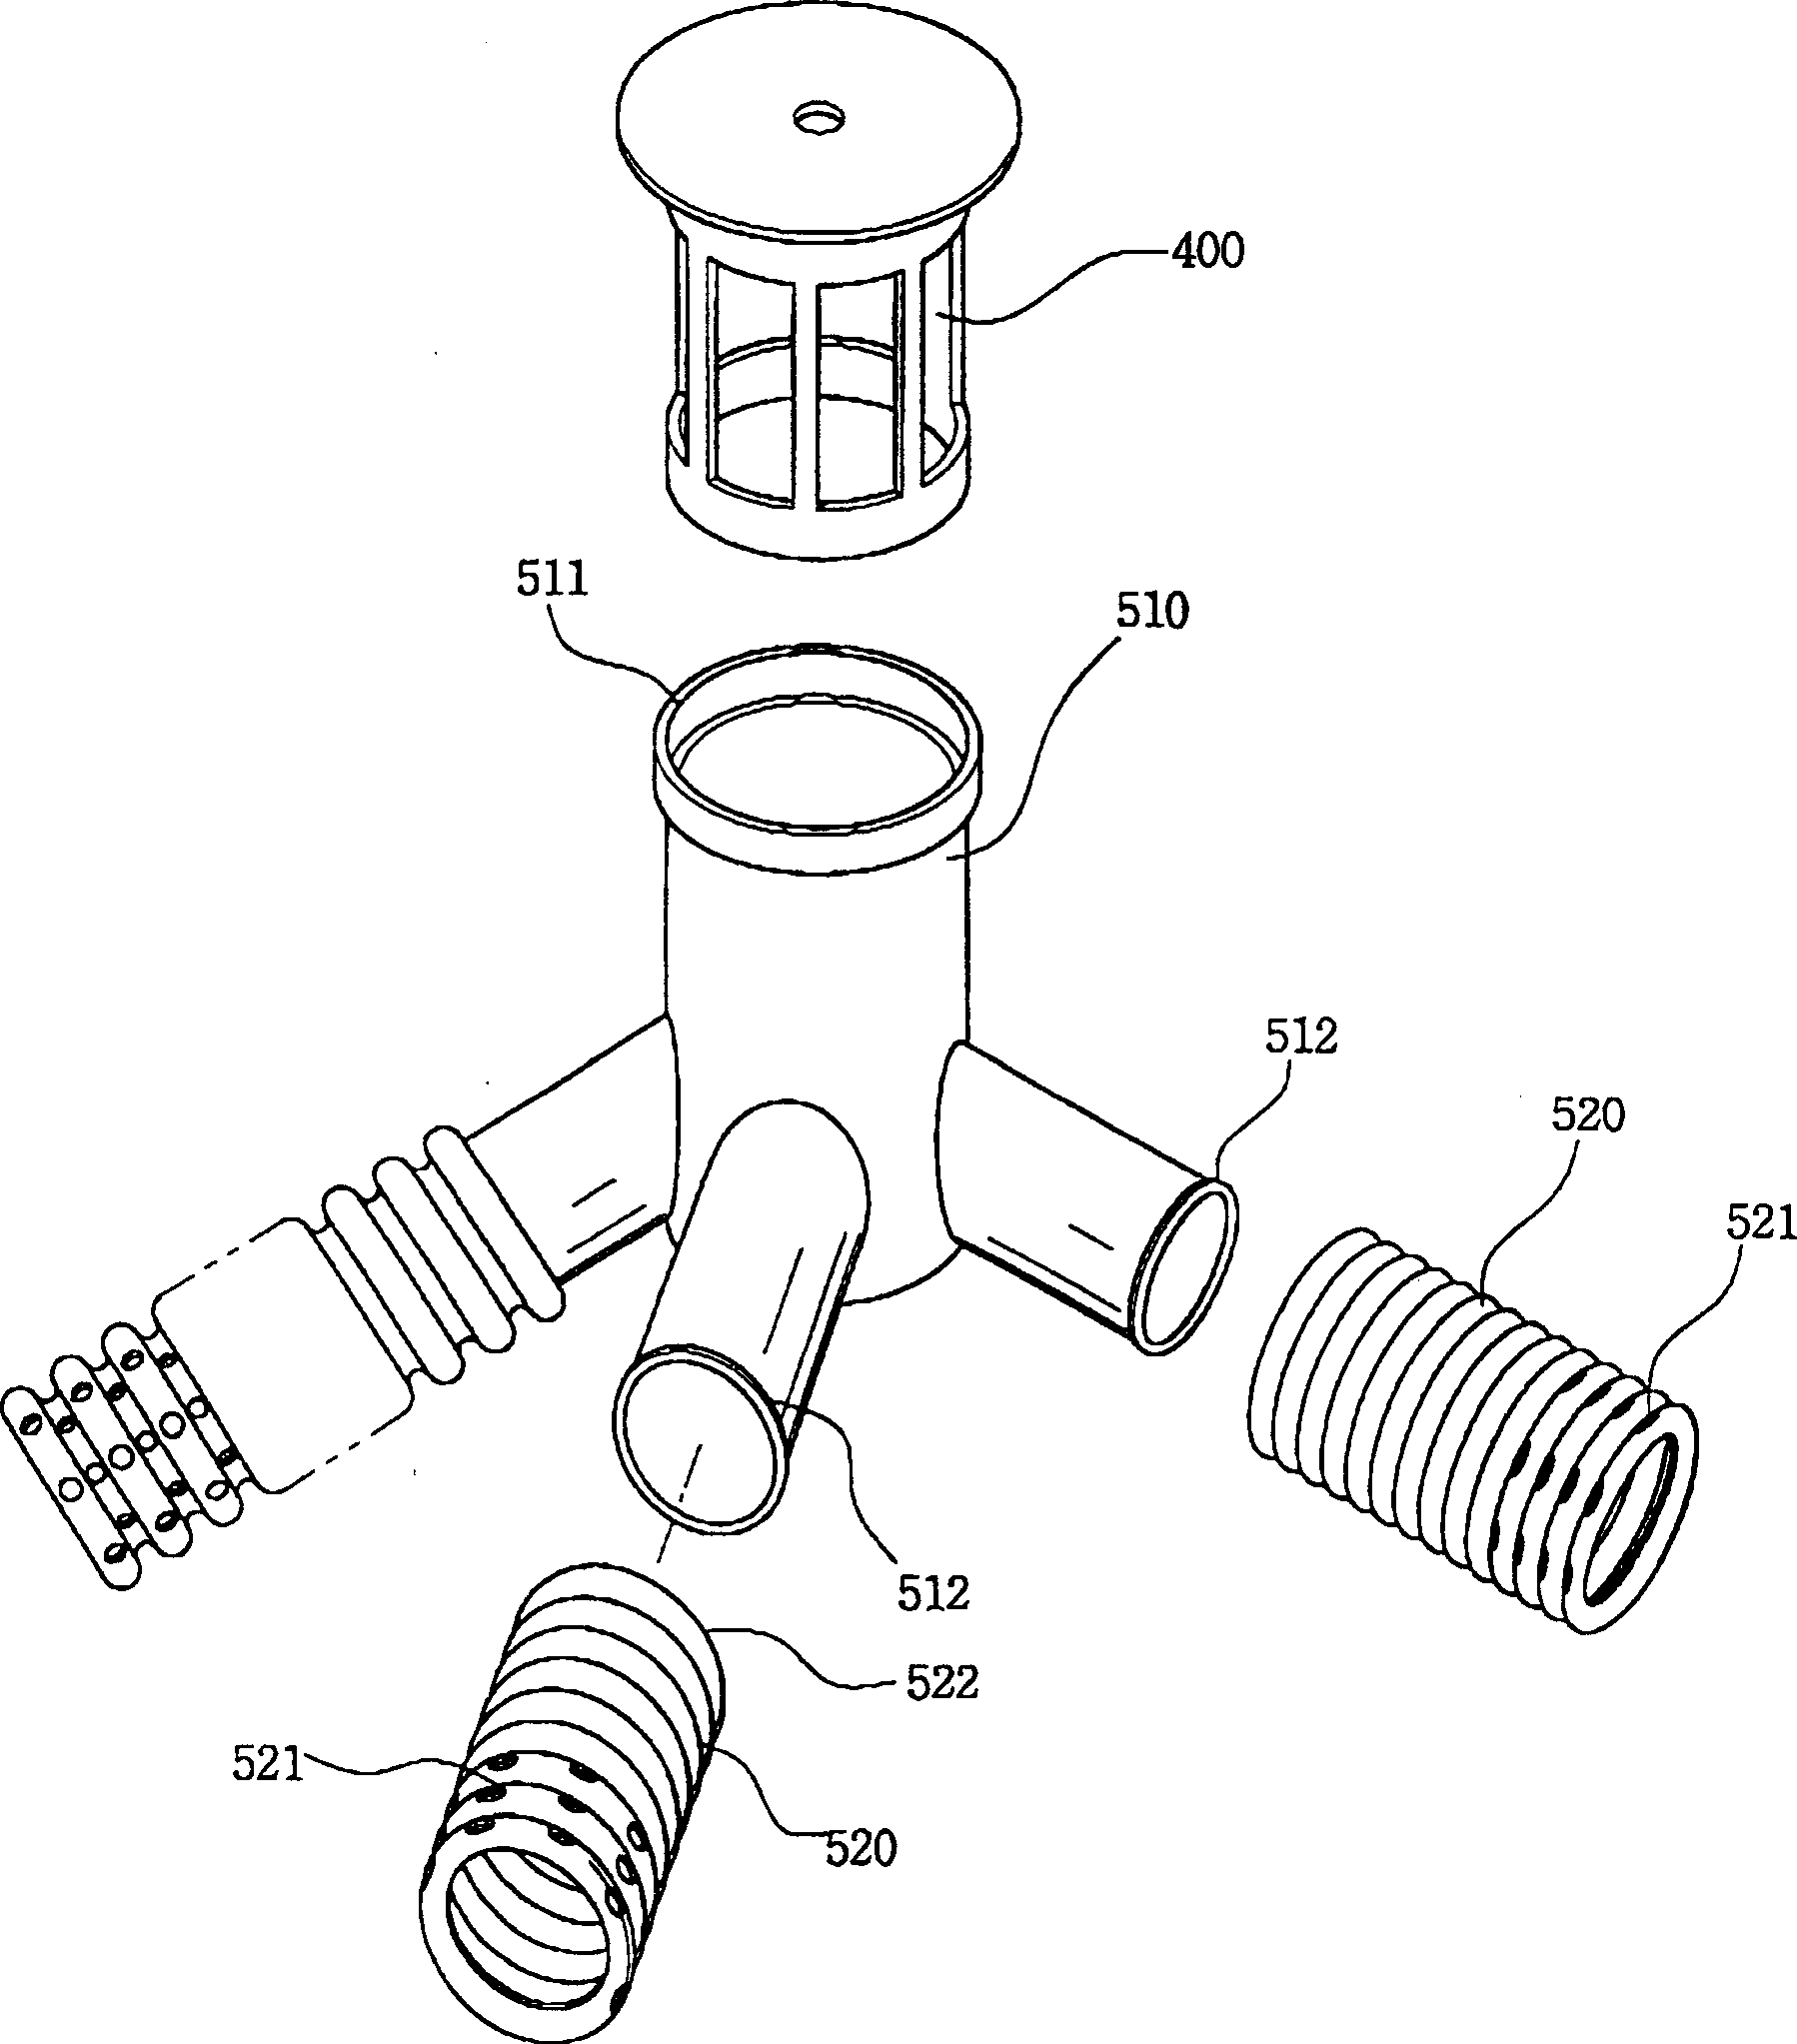 Apparatus and method for improving water quality of reservoir